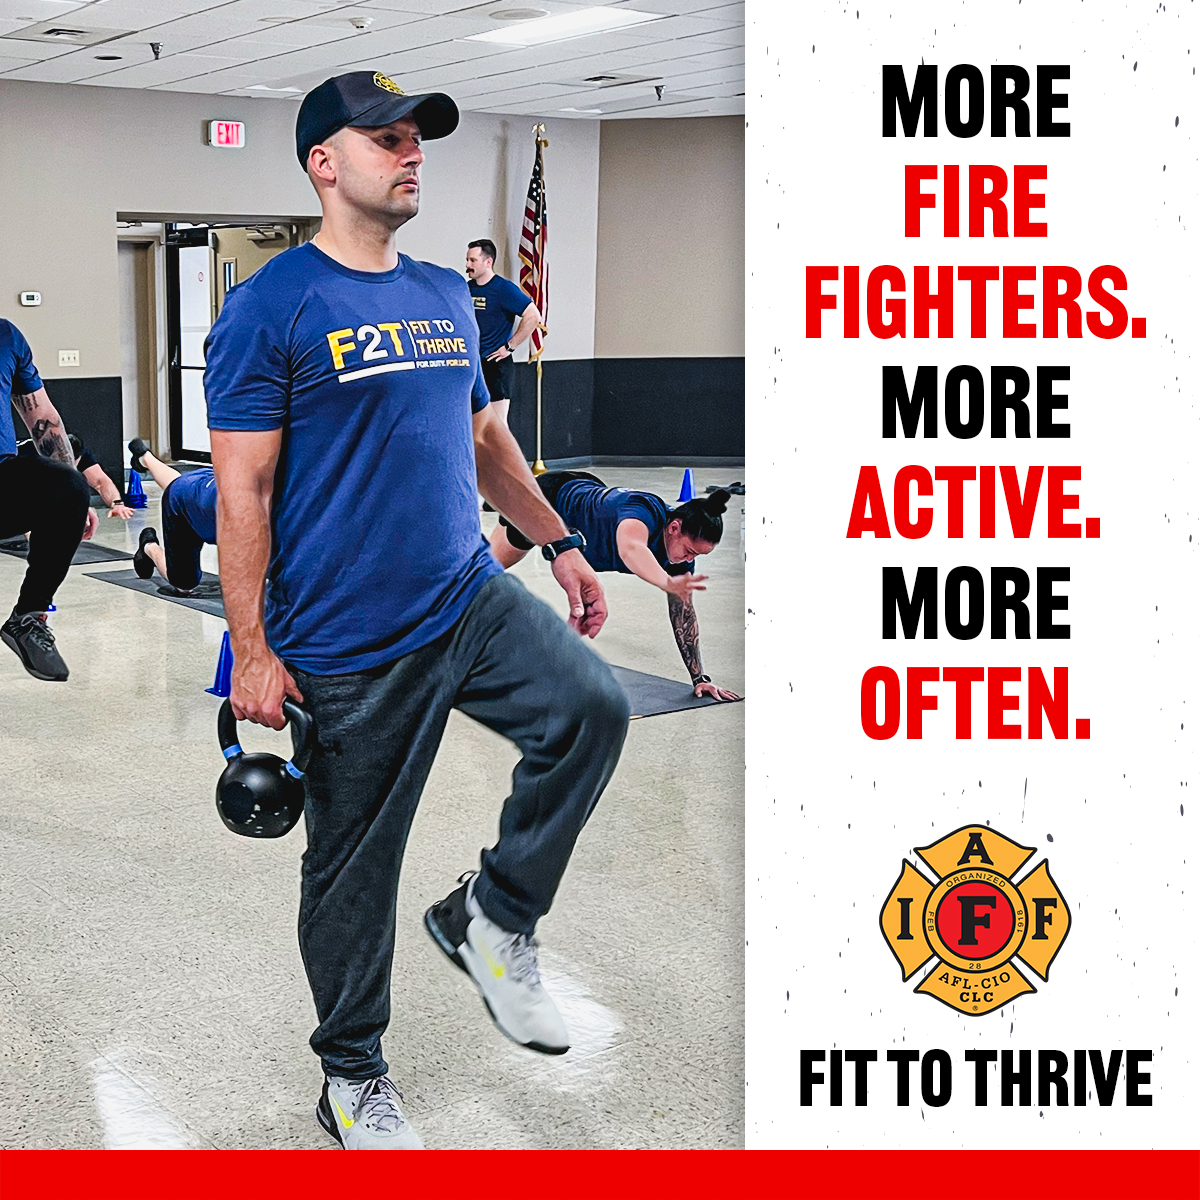 Need CECs to renew your PFT certificate? Fit To Thrive offers multiple options including self-paced workshops. For a list of all available options, visit bit.ly/49mDxo7 To see complete renewal requirements: bit.ly/3PbHfJi @F2T_IAFF